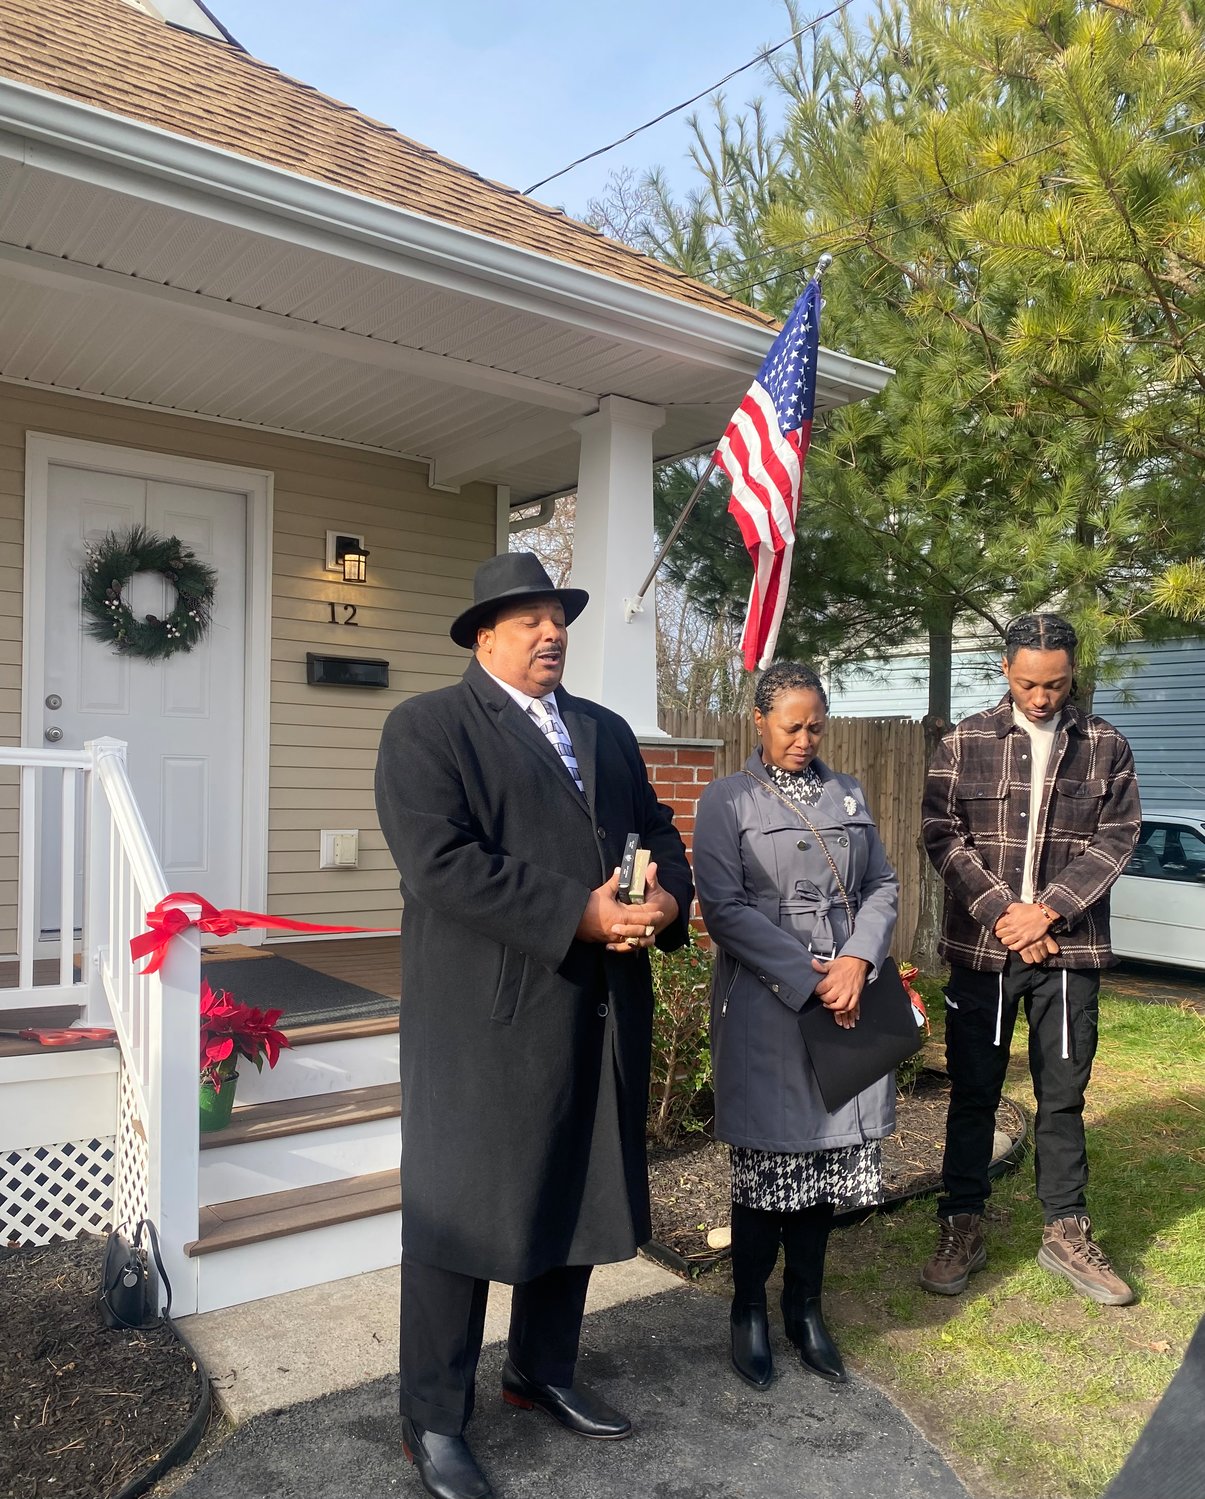 Bishop Harrison Hale, the senior pastor of Cornerstone Church of God in Christ Inc., blesses DeVon and Helen’s new home in Bay Shore.